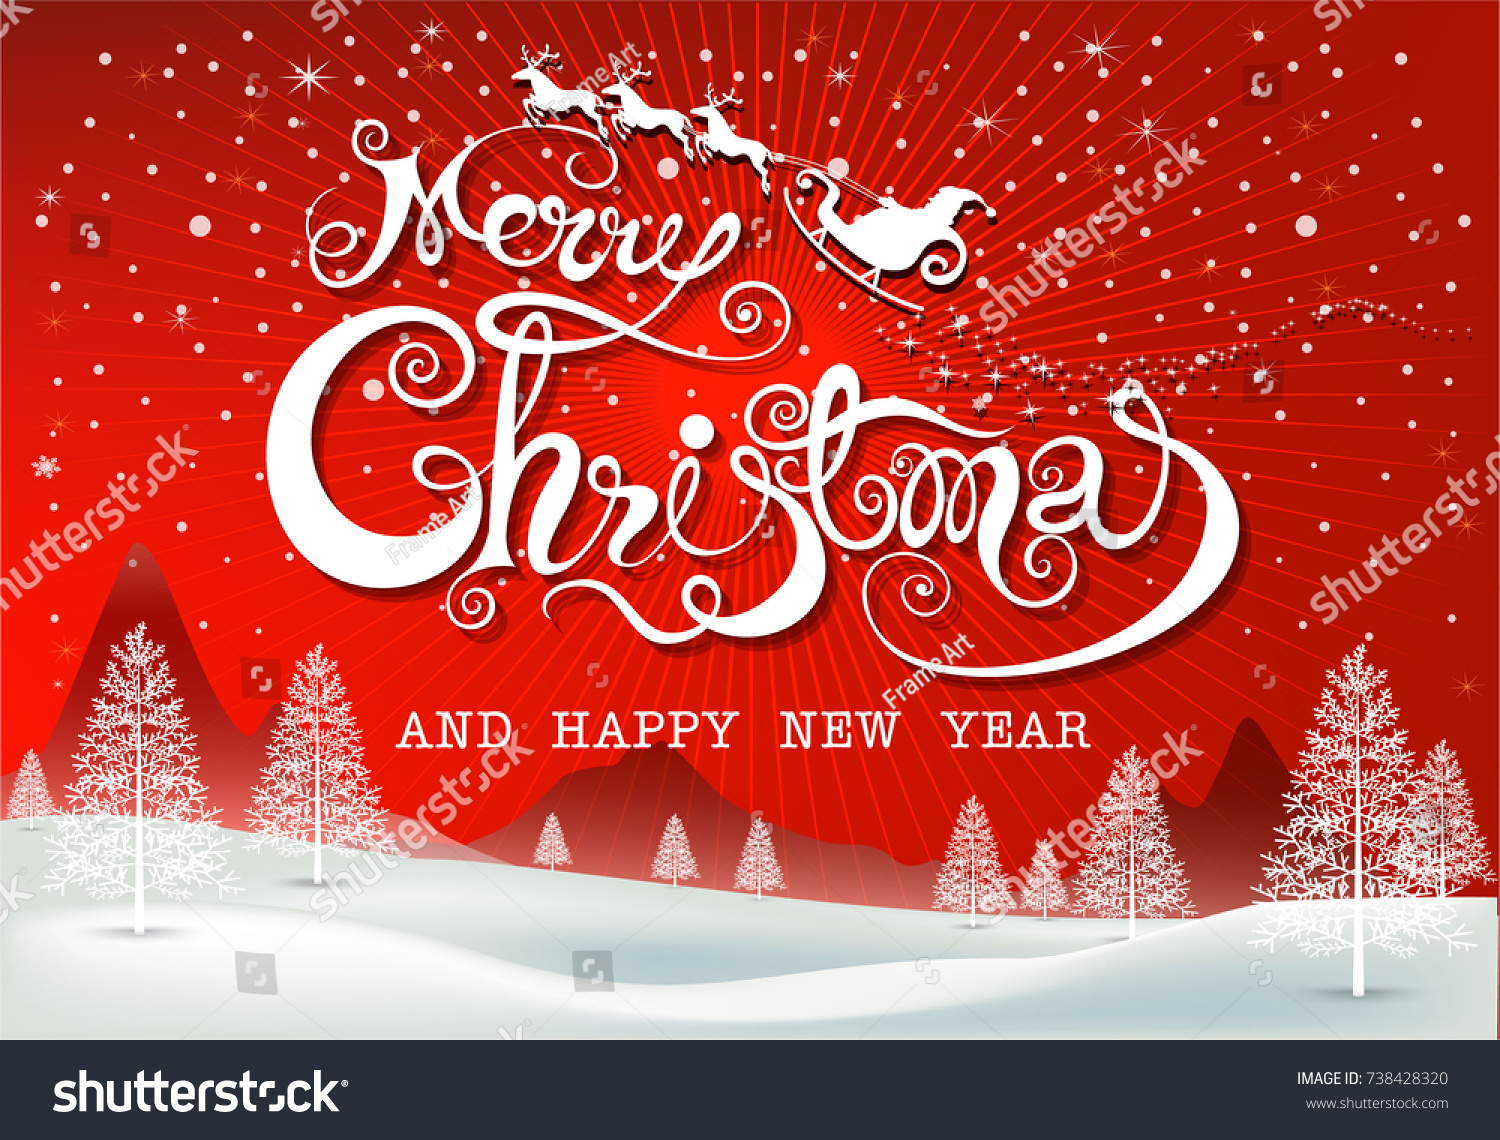 Merry Christmas Everyone greeting card, Vintage Background With red sky and snow. Merry Christmas and happy new year text design, vector illustration. #738428320